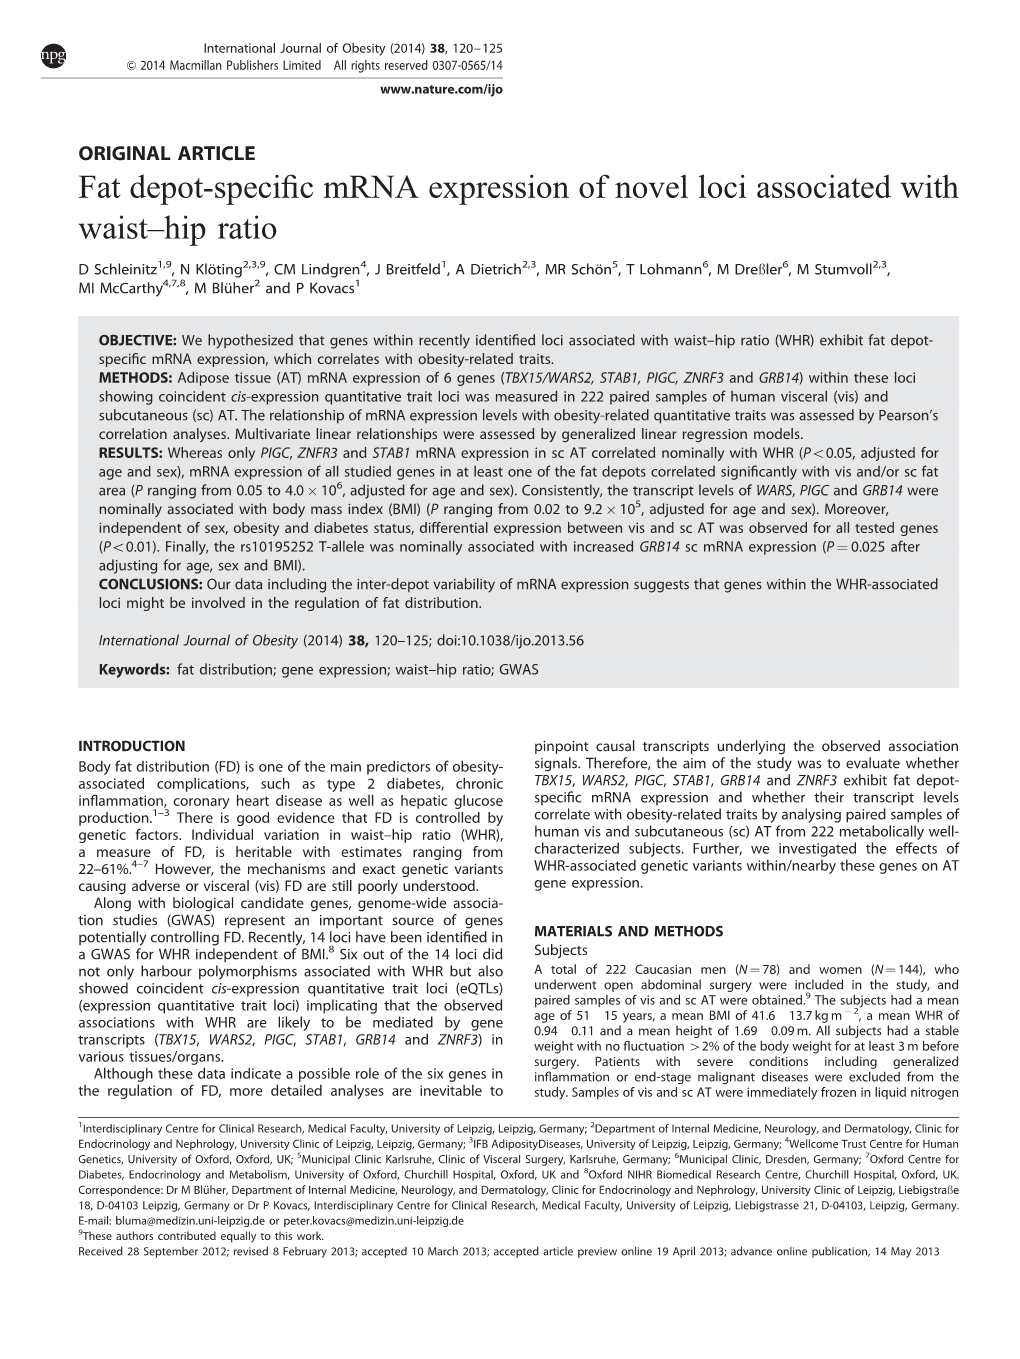 Fat Depot-Specific Mrna Expression of Novel Loci Associated